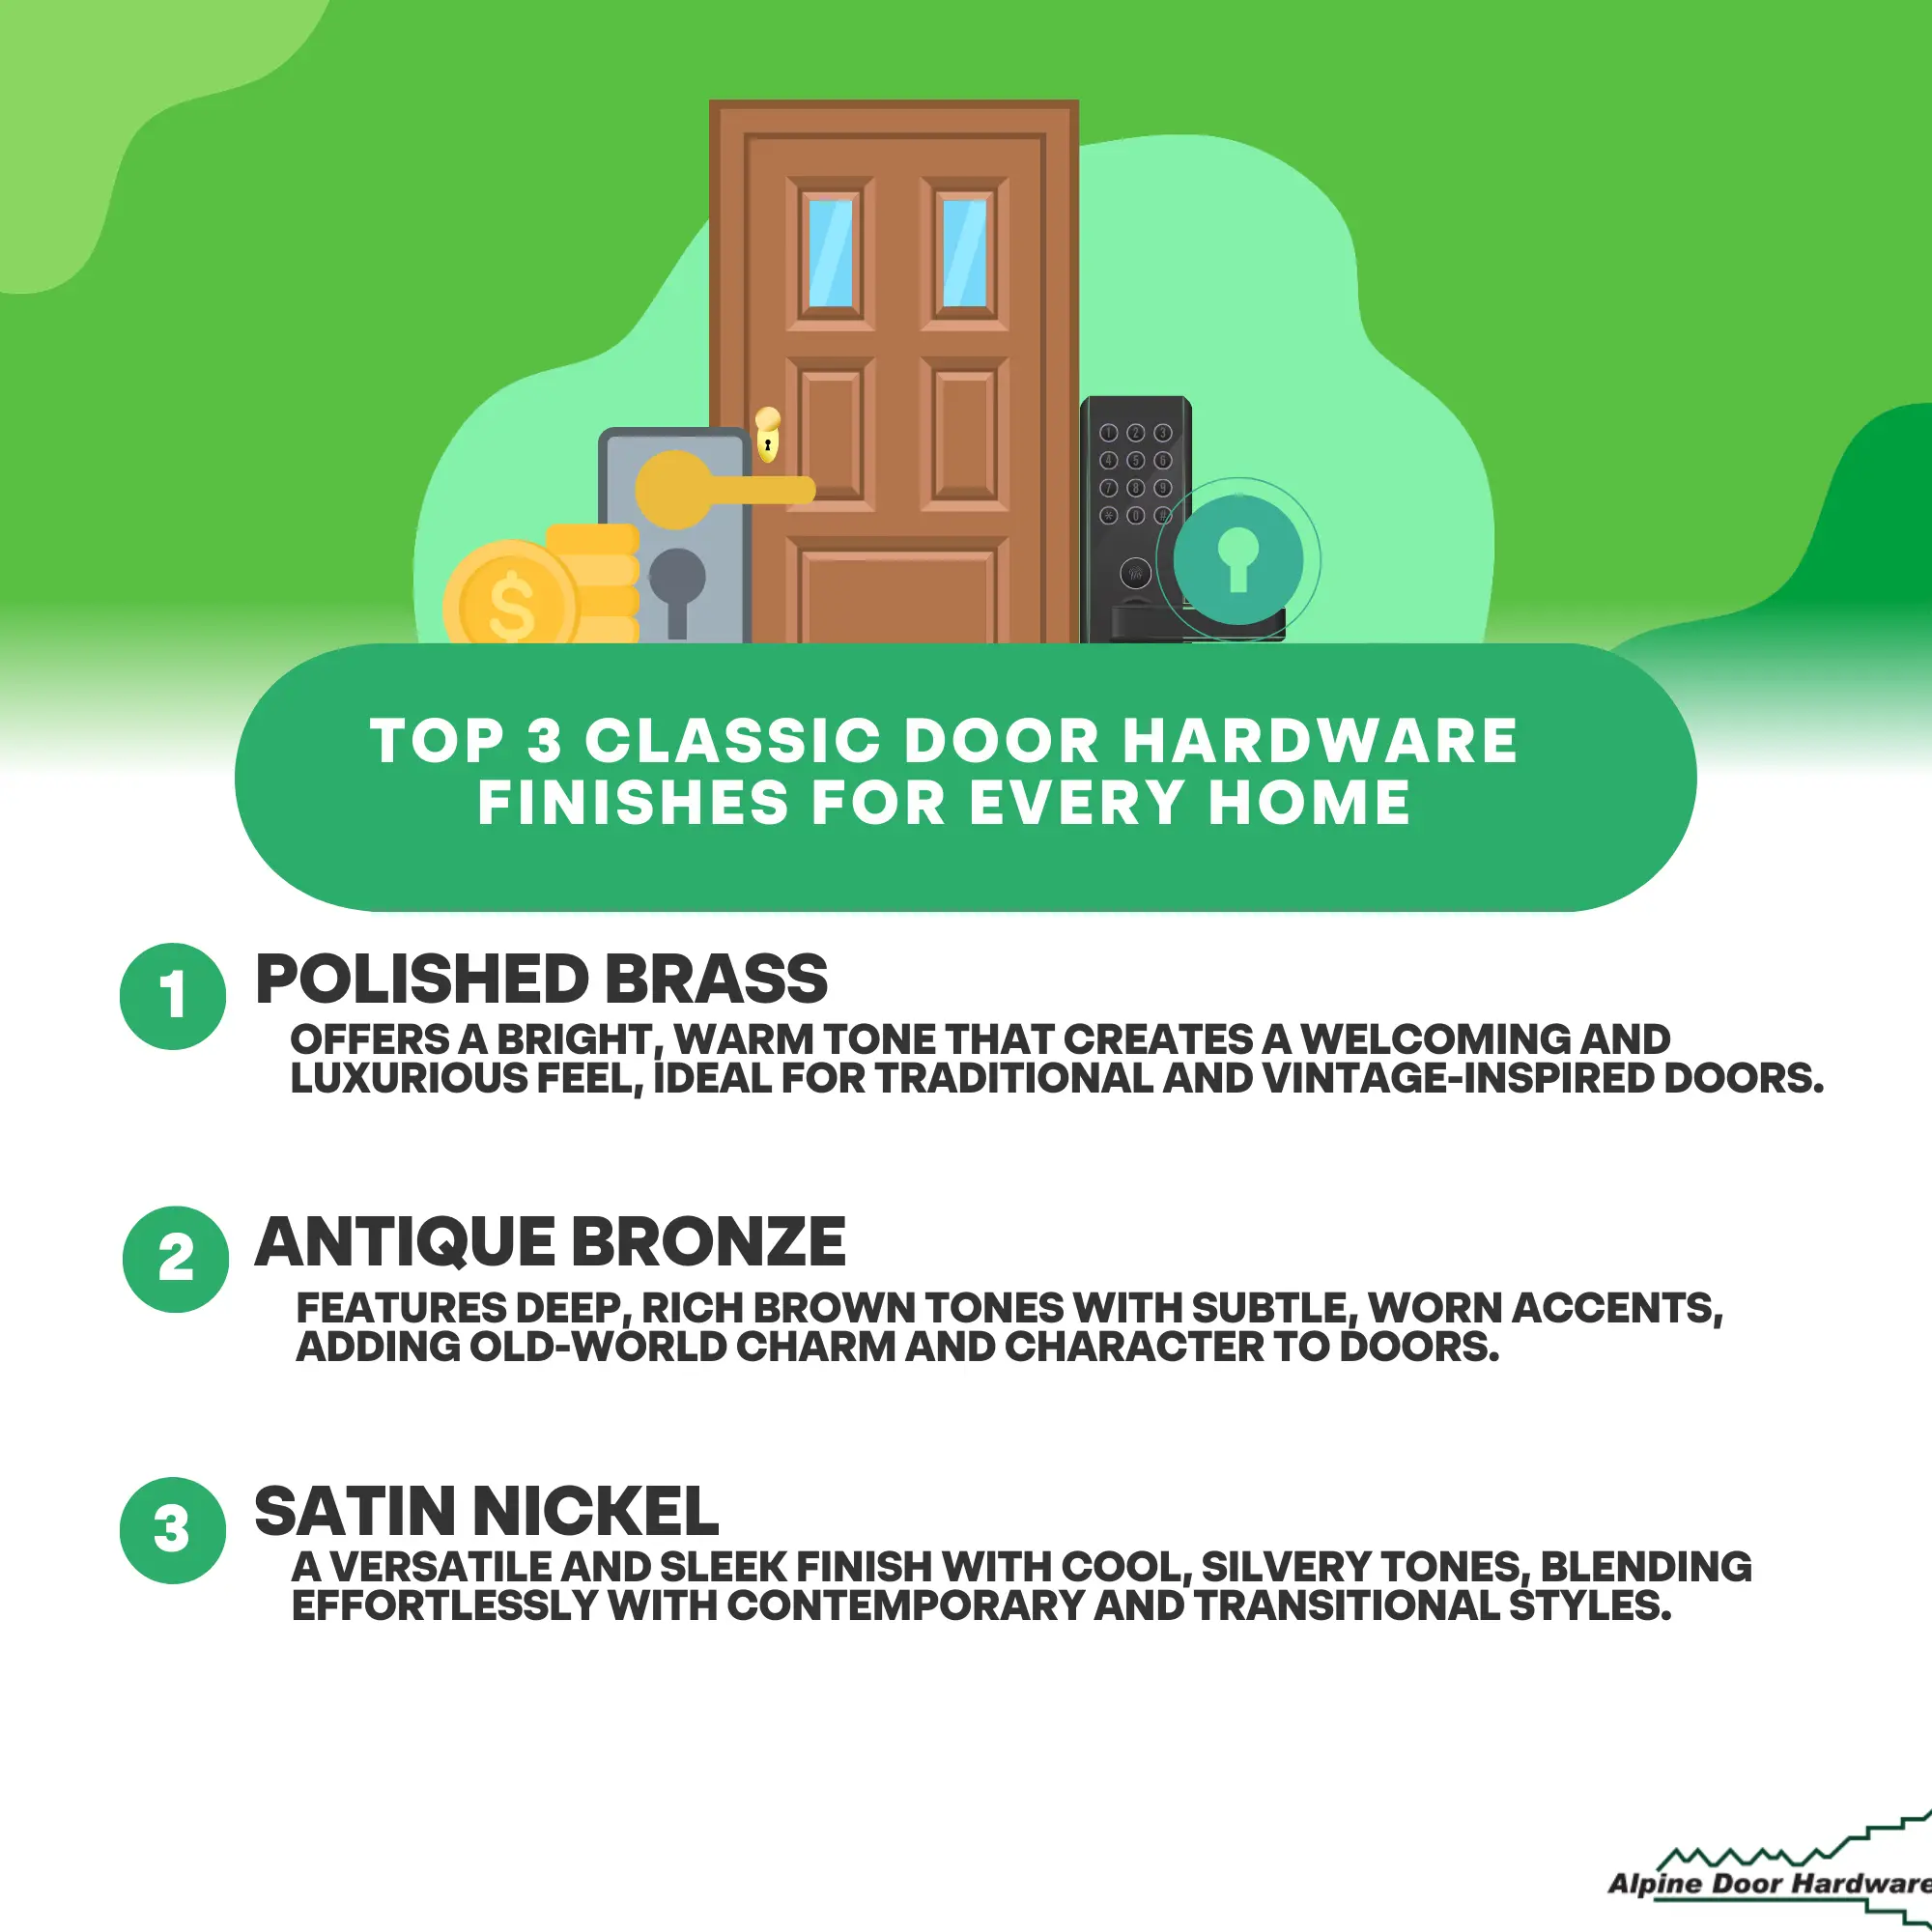 Top 3 Classic Door Hardware Finishes for Every Home